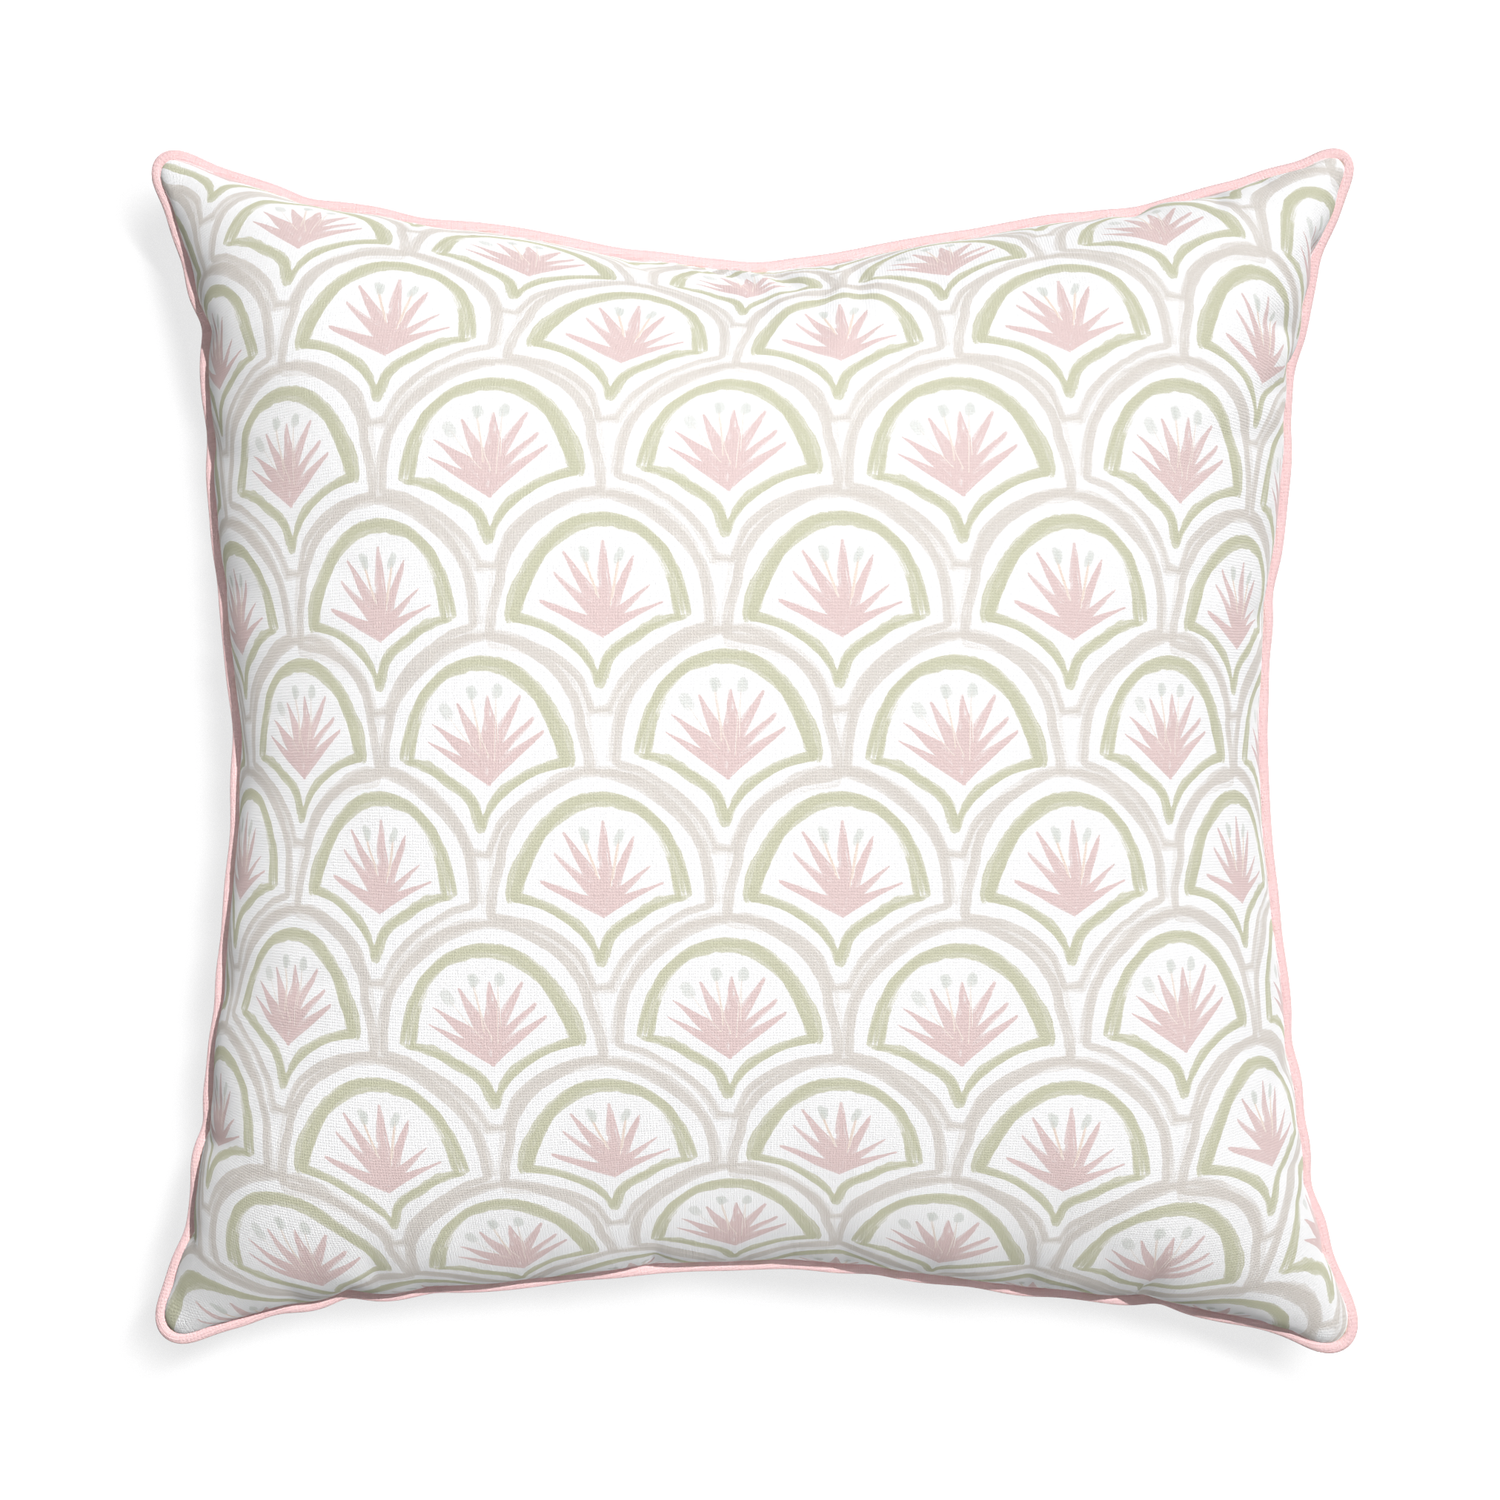 Euro-sham thatcher rose custom pillow with petal piping on white background